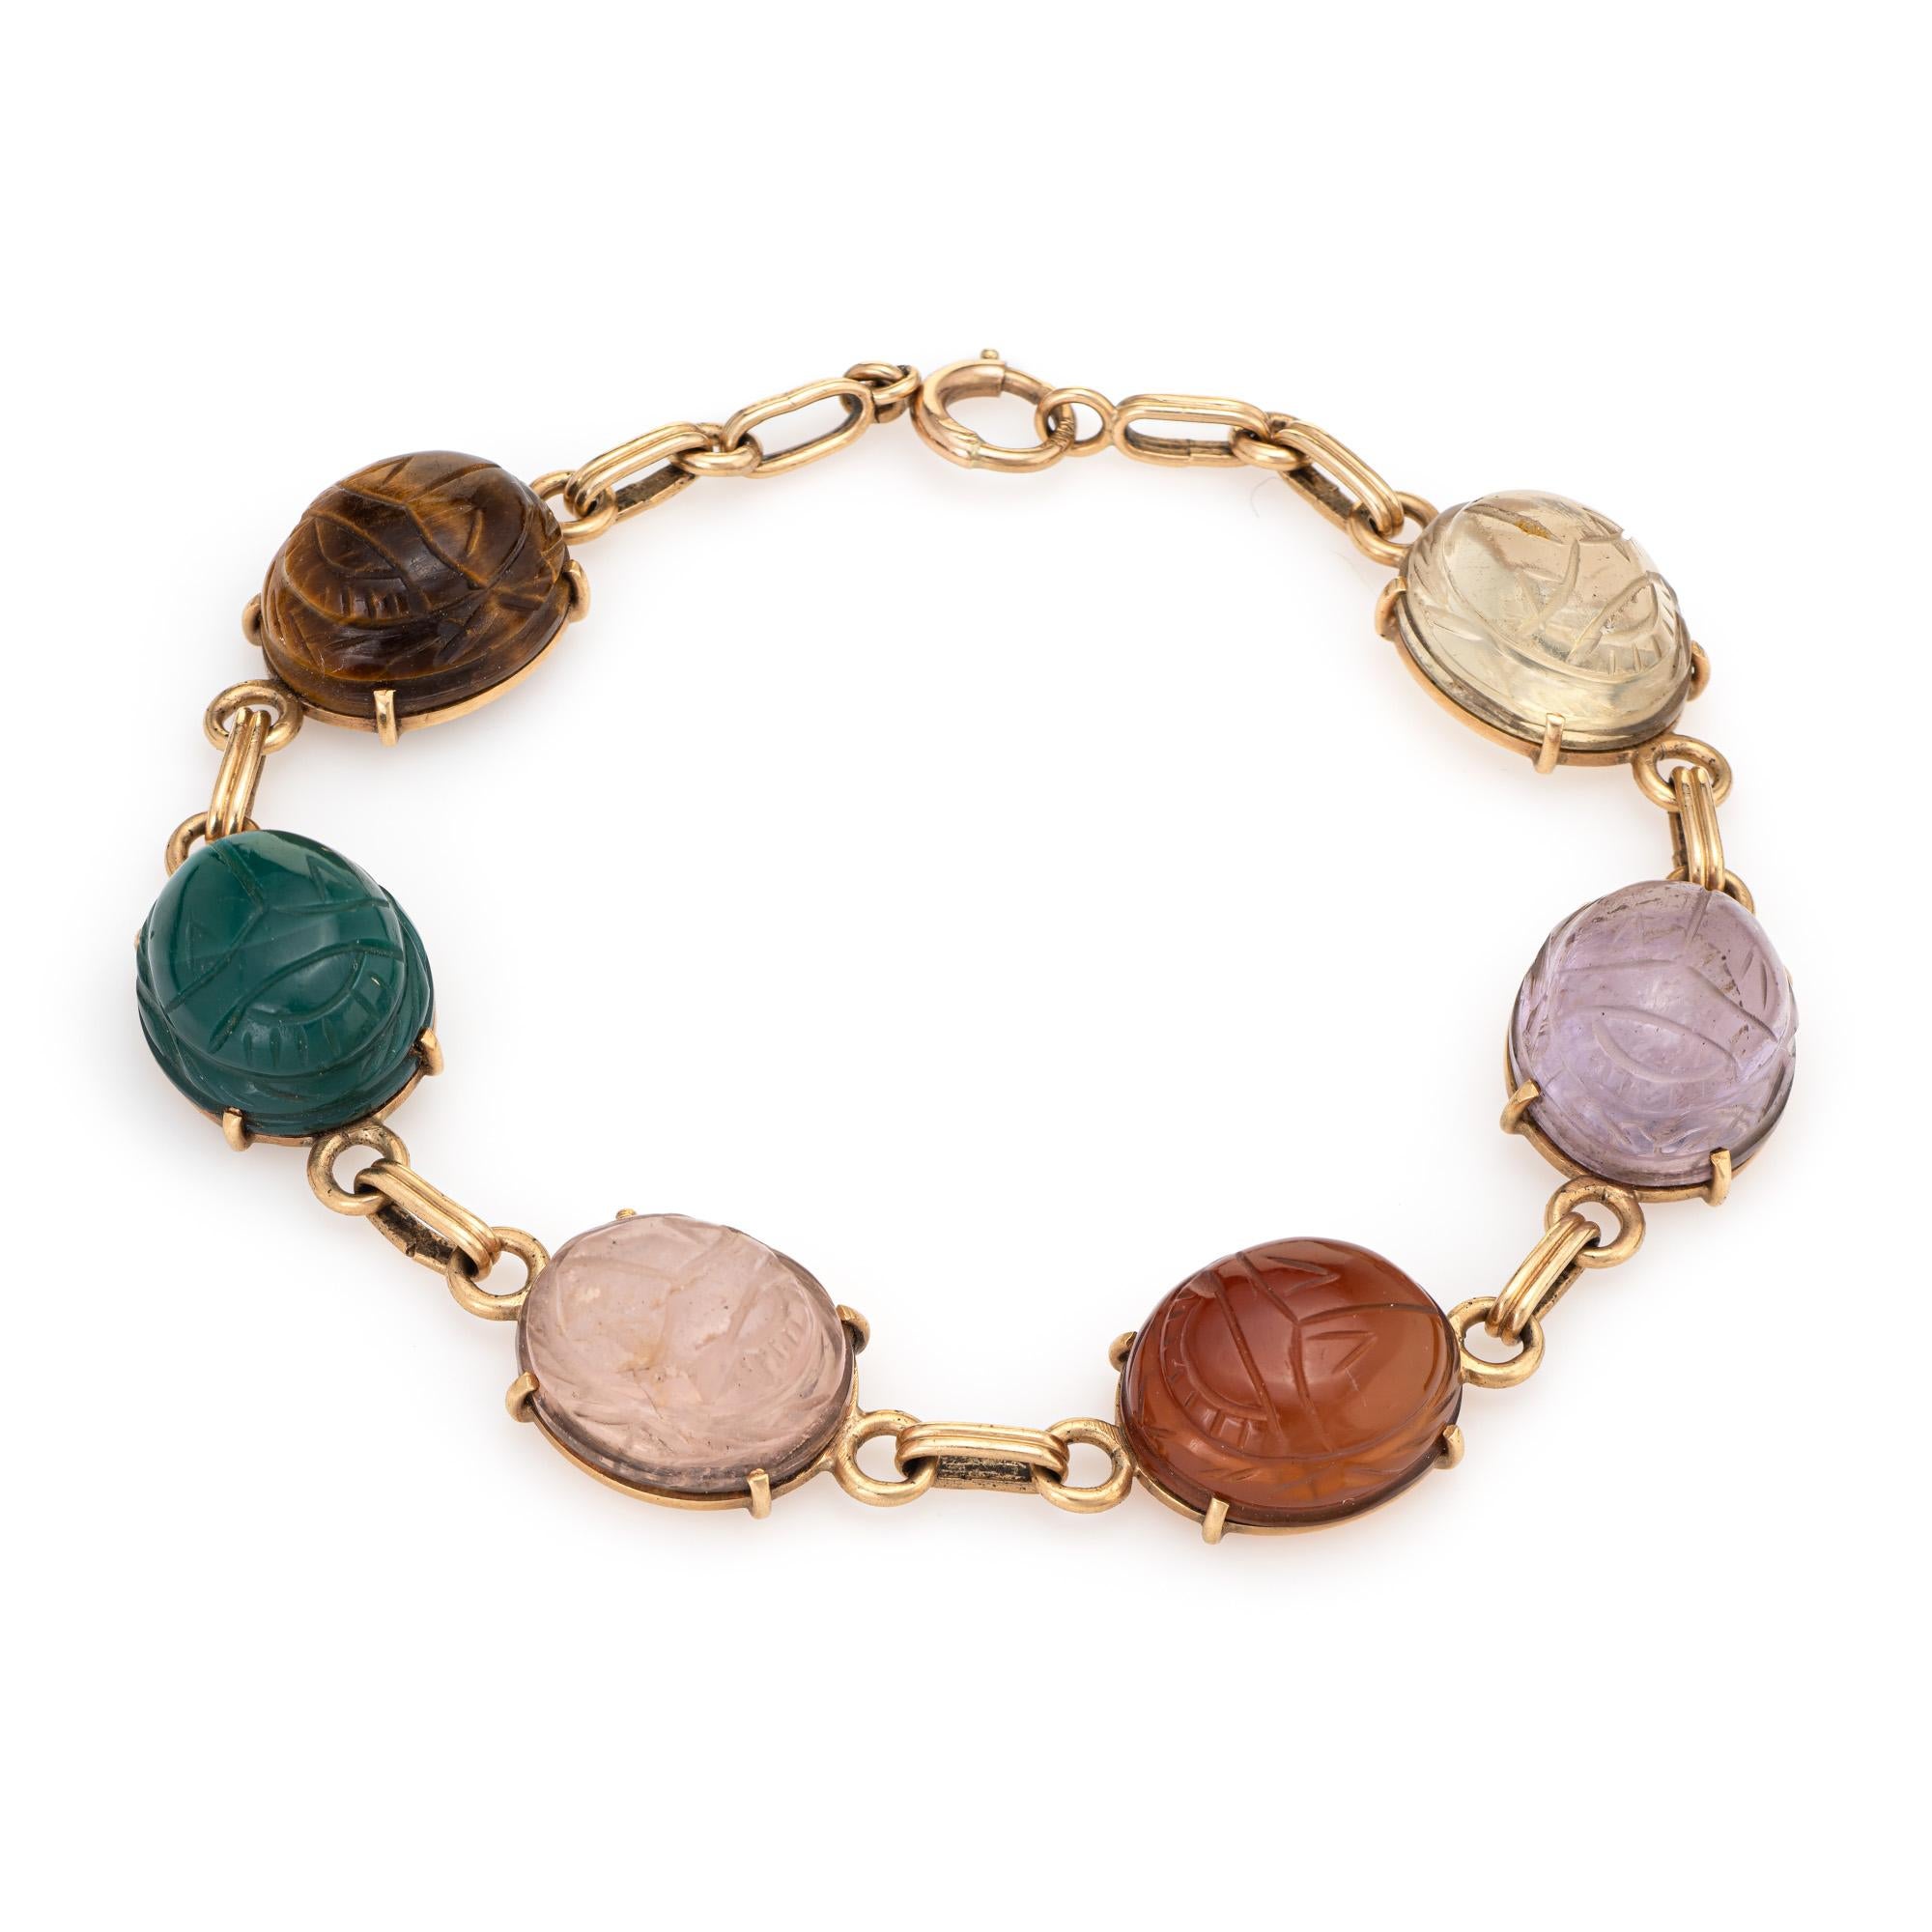 Stylish and finely detailed vintage scarab bracelet (circa 1960s to 1970s) crafted in 14 karat yellow gold. 

The stones (amethyst, white quartz, rose quartz, carnelian & jasper) each measure 13.5mm x 12mm. The stones are in excellent condition and